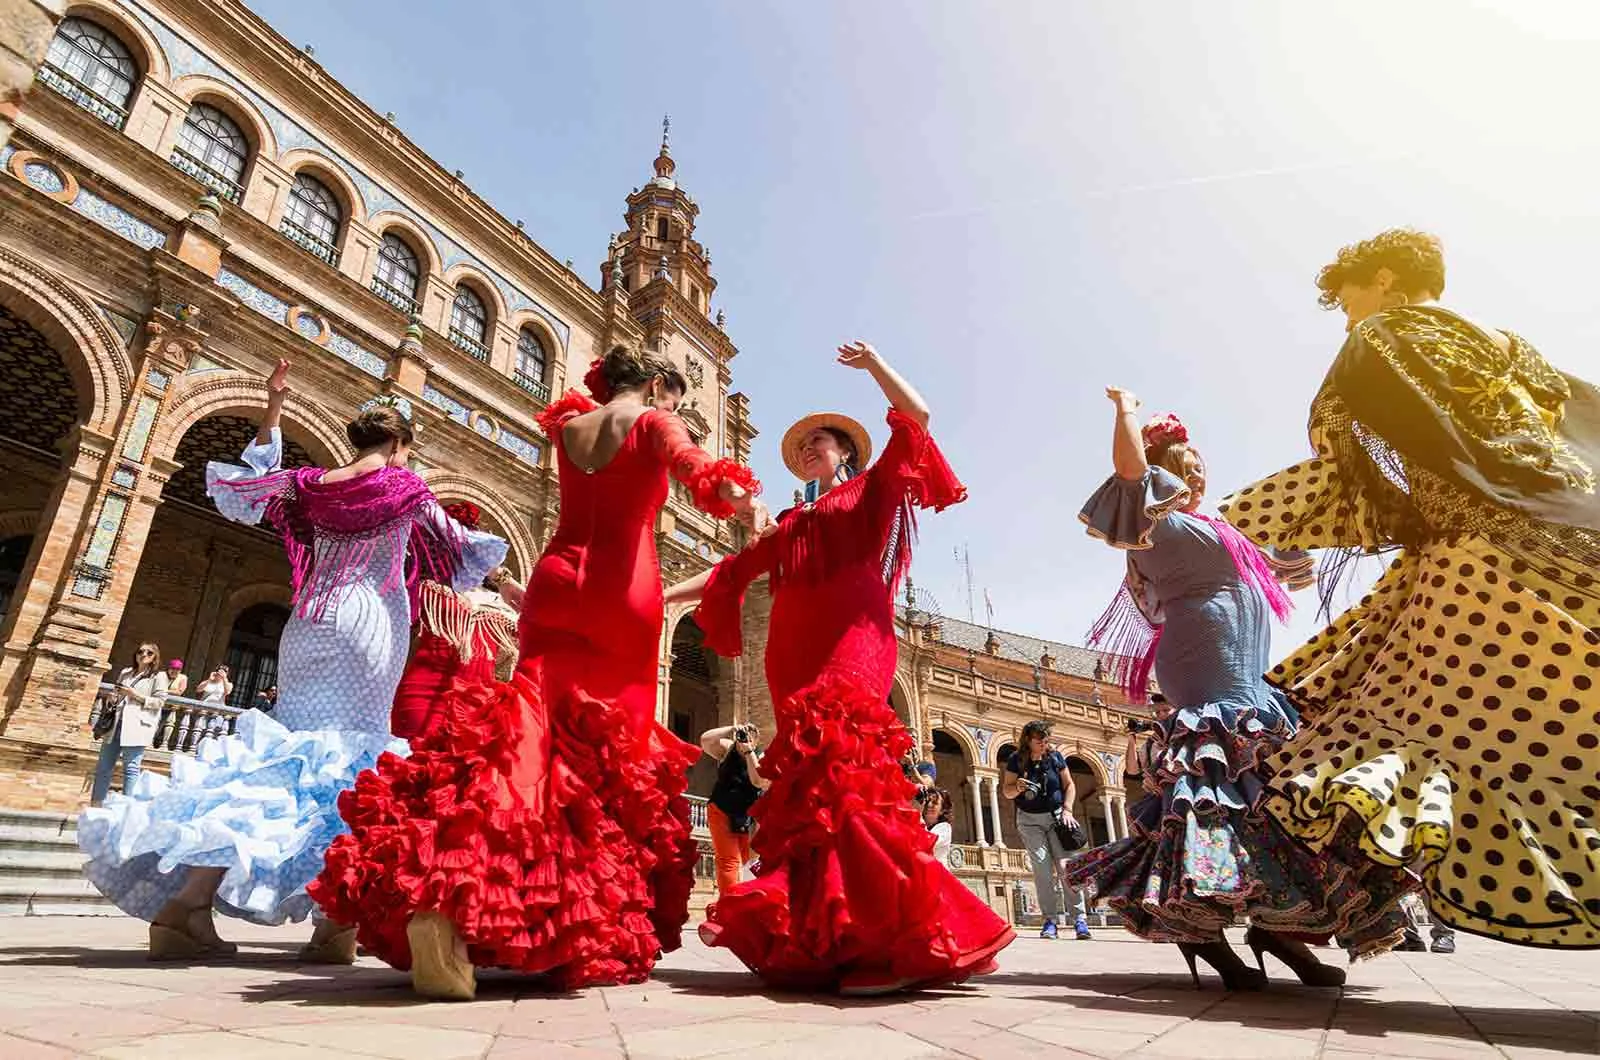 Traditionally dressed Spanish women performing in the square of a Spanish city. Concept of Spanish translations.